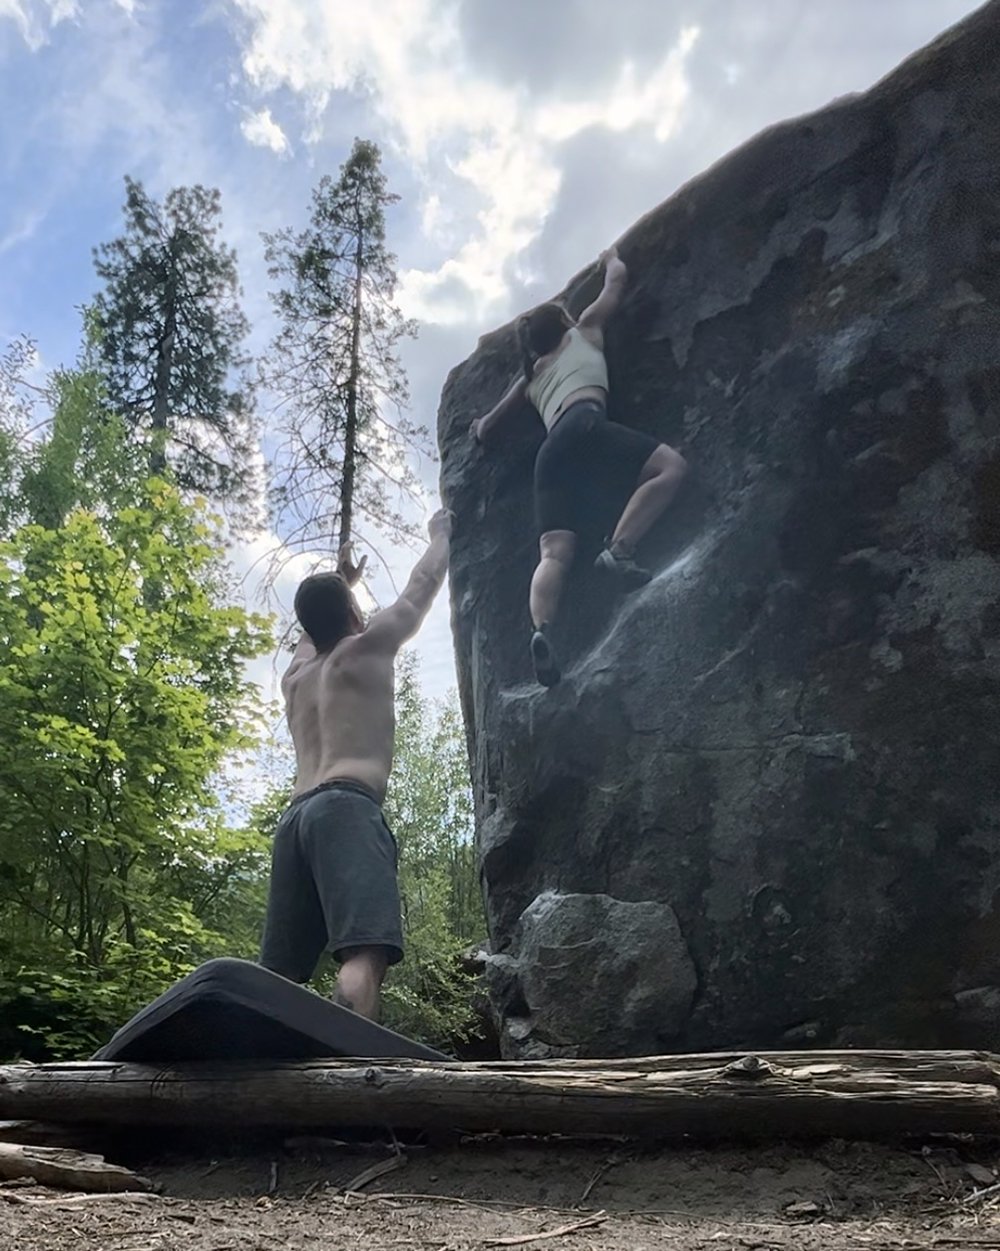  Finally making it up U2 and sending my third V3 of the week.  